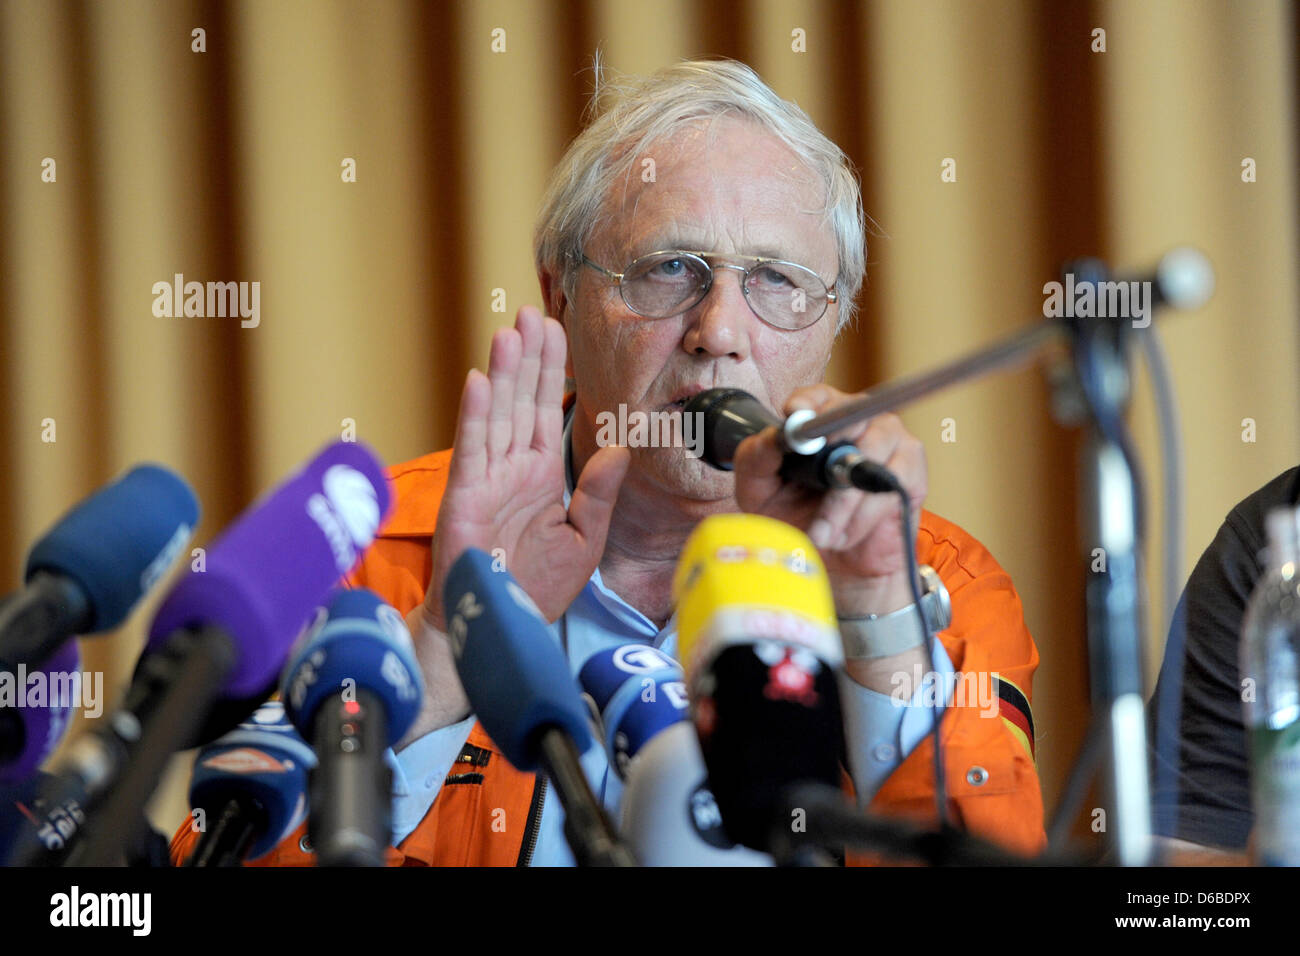 Guenther Sobieralski from the bomb disposal agency talks about the discovery of World War II-era bomb during a press conference in Munich, Germany, 28 August 2012. It was was found in the Schwabing area and the diffusion of the bomb will last until early evening. Photo: MARC MUELLER Stock Photo